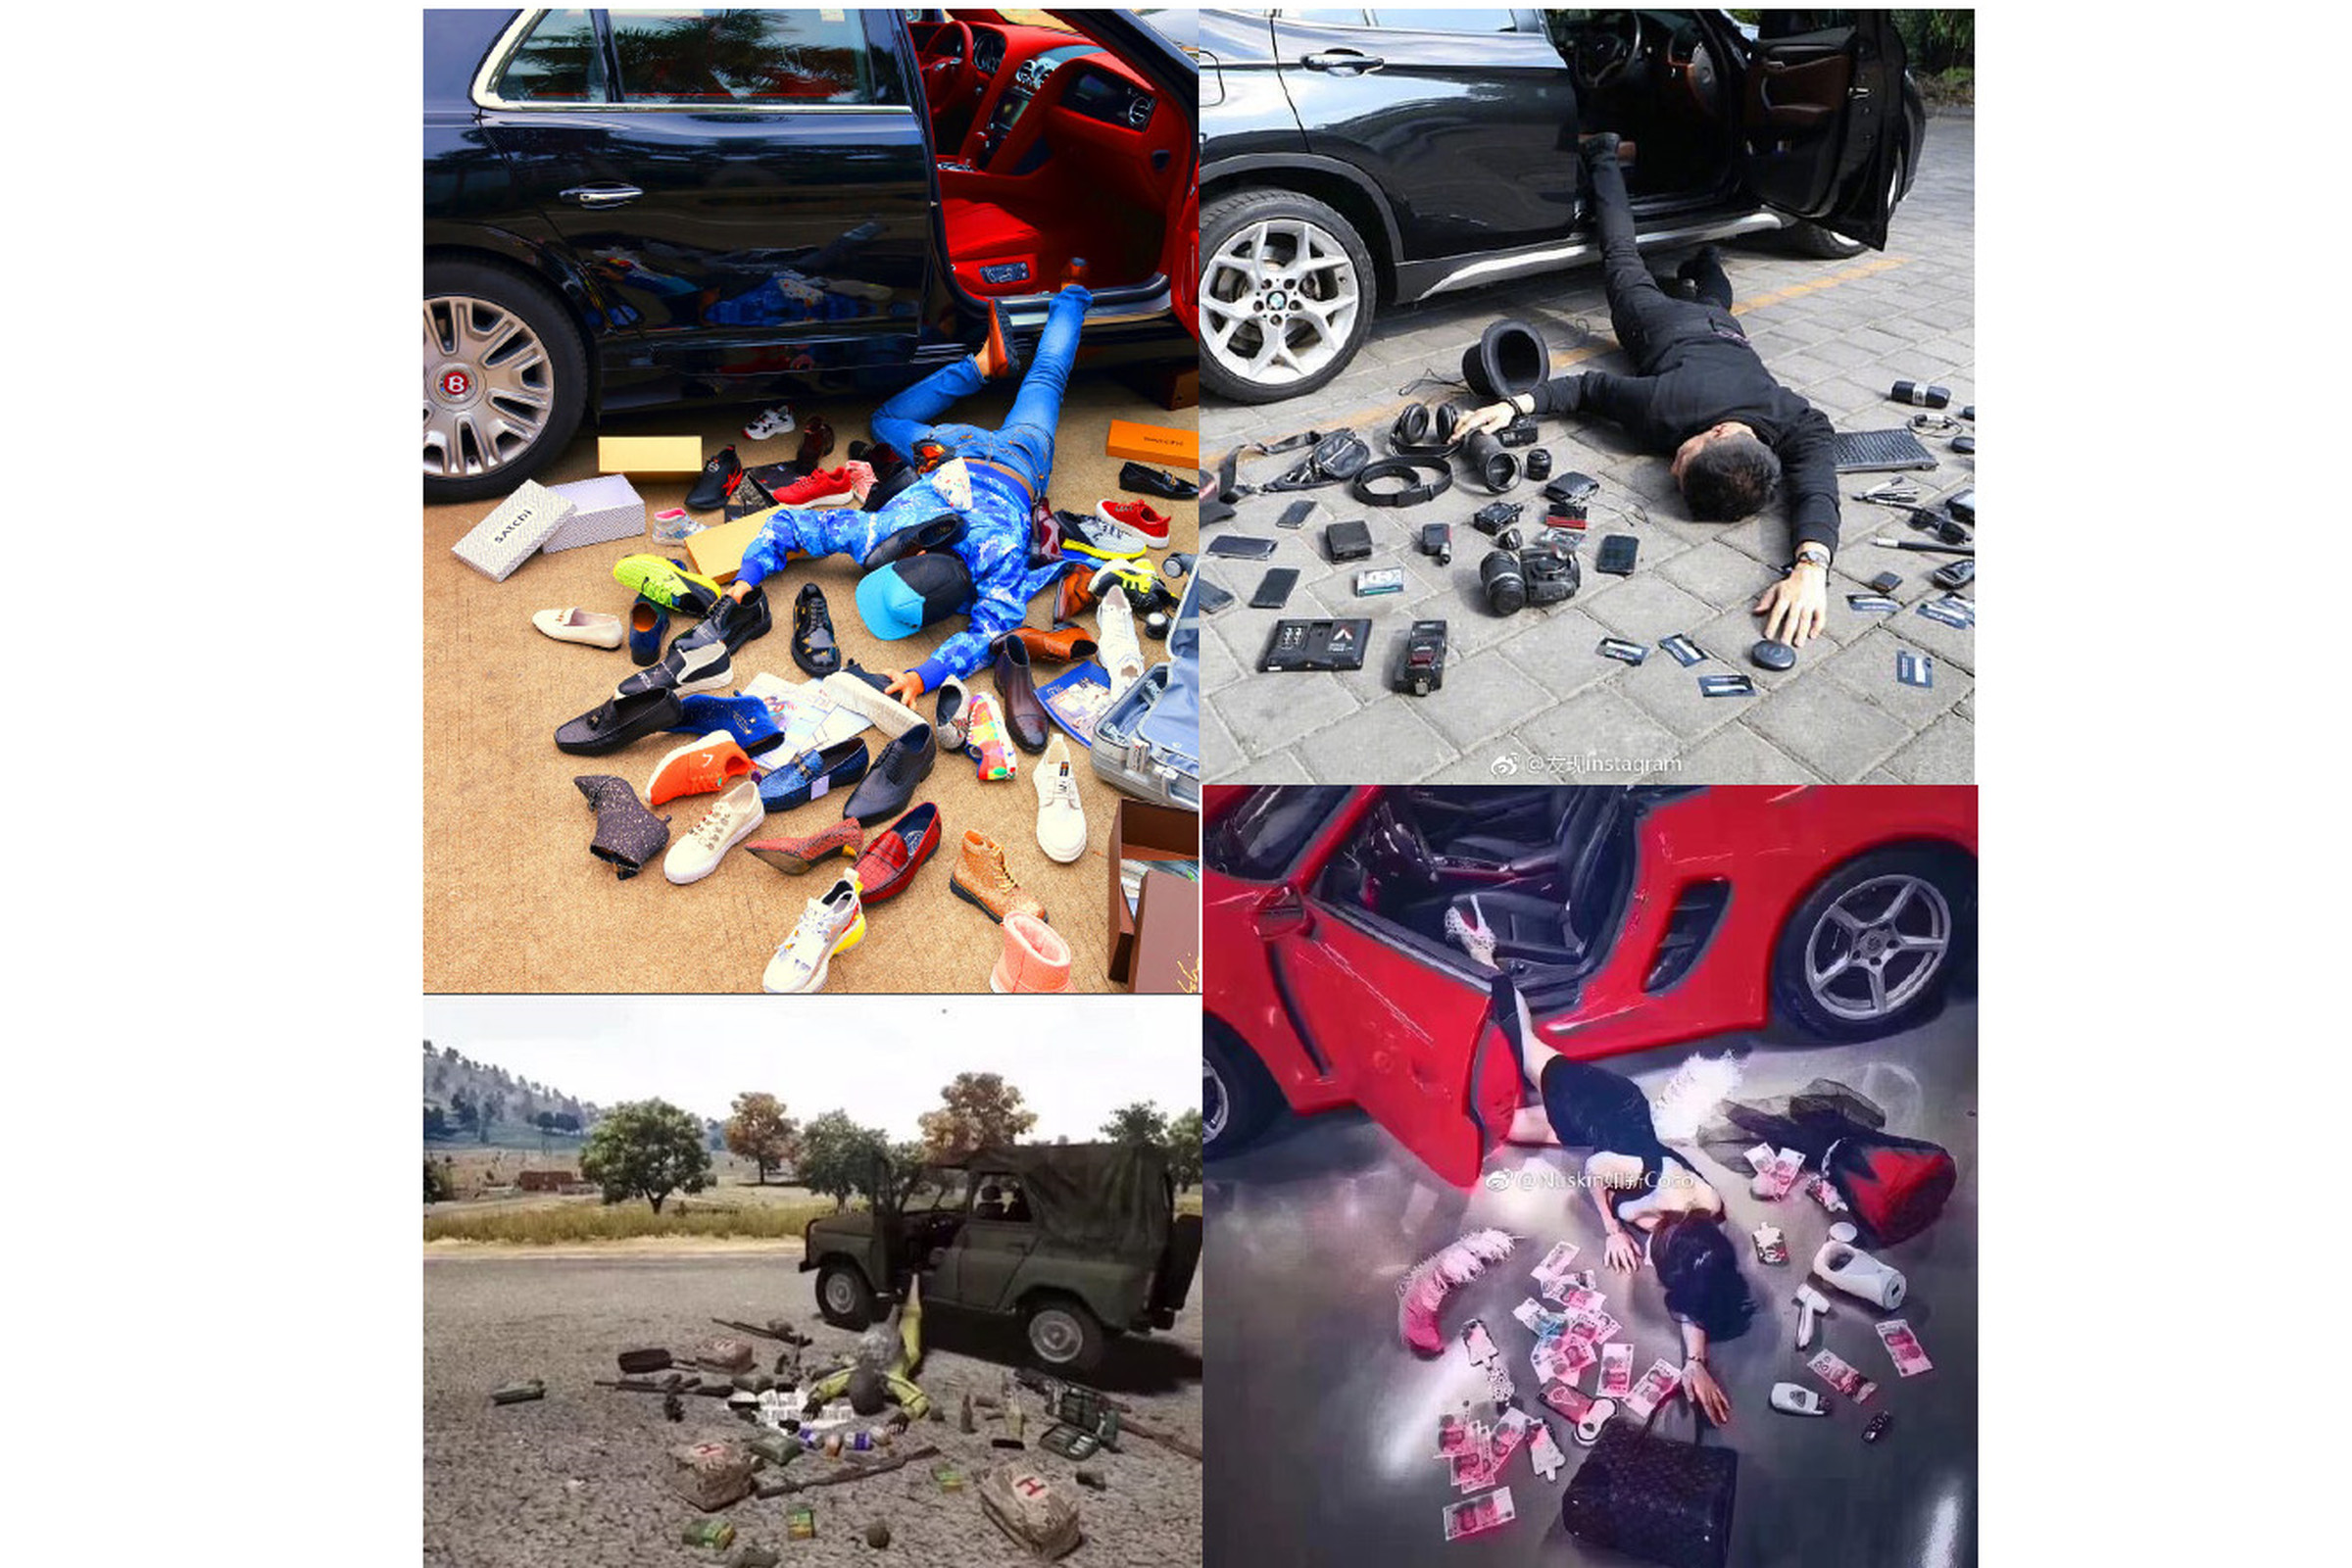 Clockwise from top left: various Chinese users pose falling out of their cars surrounded by luxury goods and money, and a PUBG character falls out of a Russian UAZ.